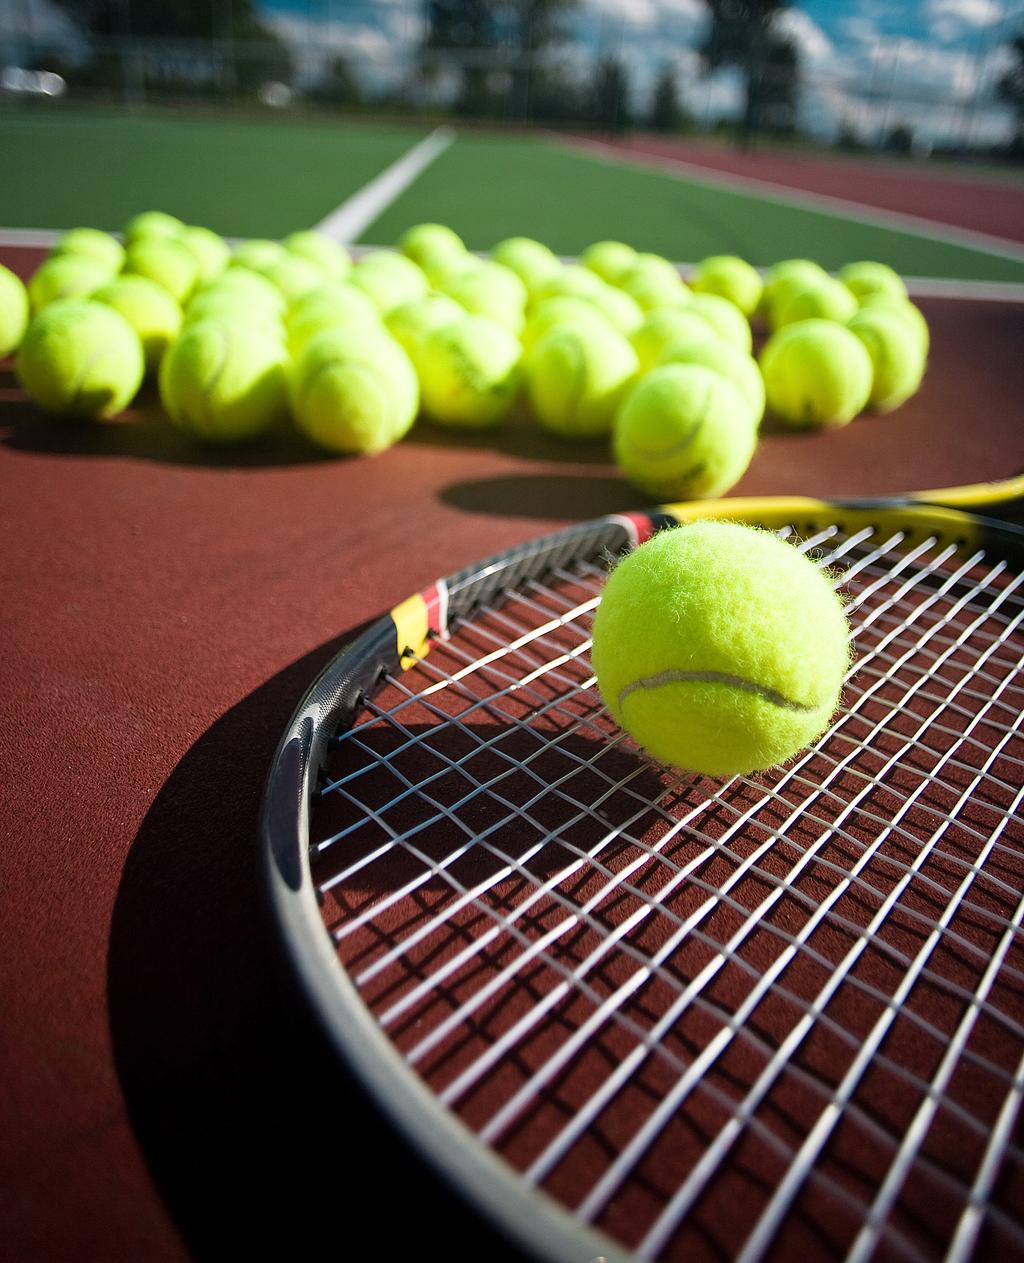 We Produce Champions The Atlantic Club Tennis Center is regarded as one of the best instructional tennis centers in the state.